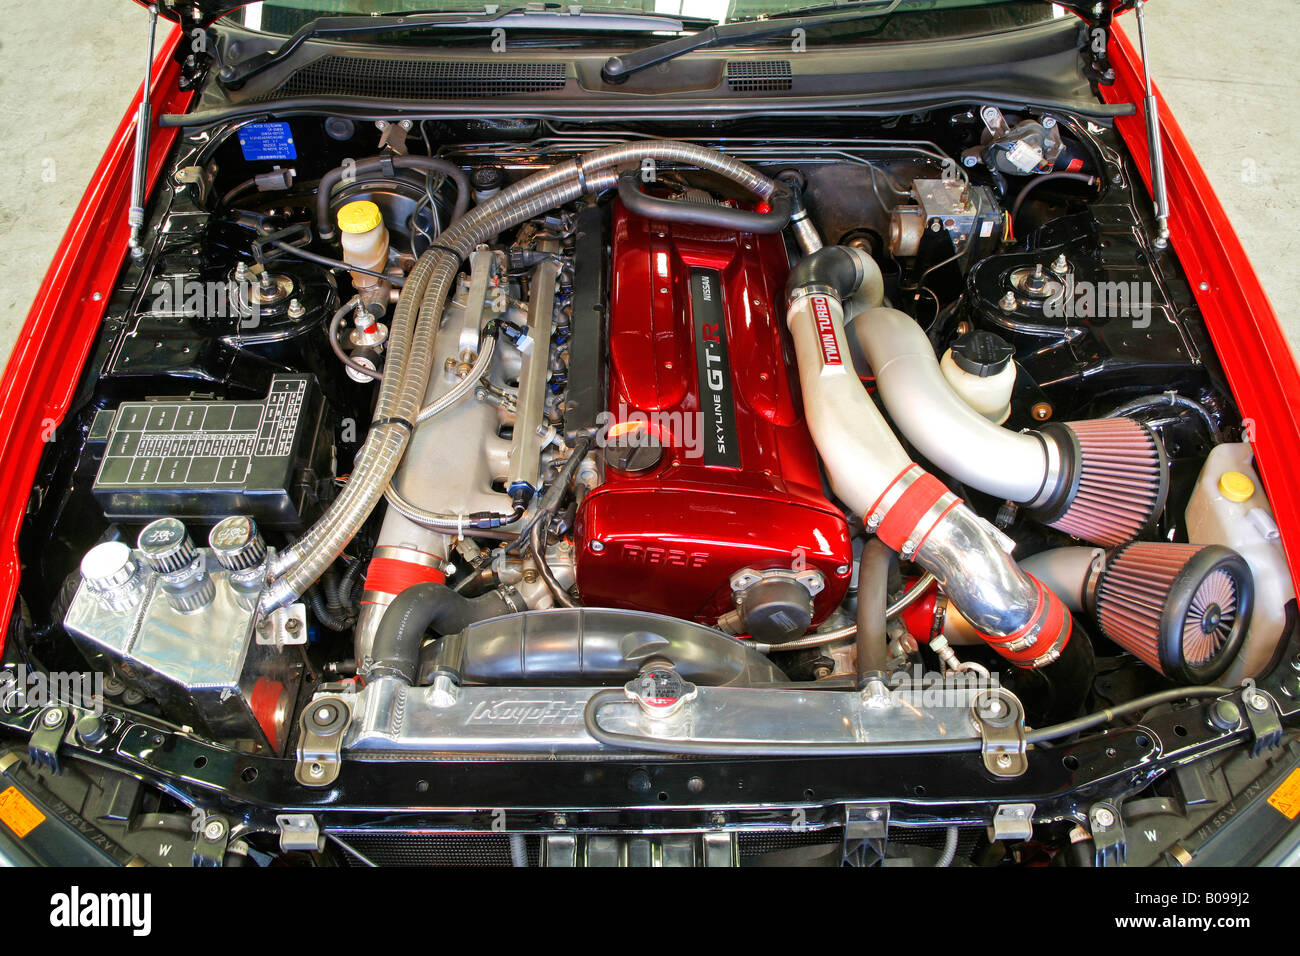 Slightly Modified Nissan Rb26dett Engine As Seen In An R34 Gt R Nissan Skyline Stock Photo Alamy